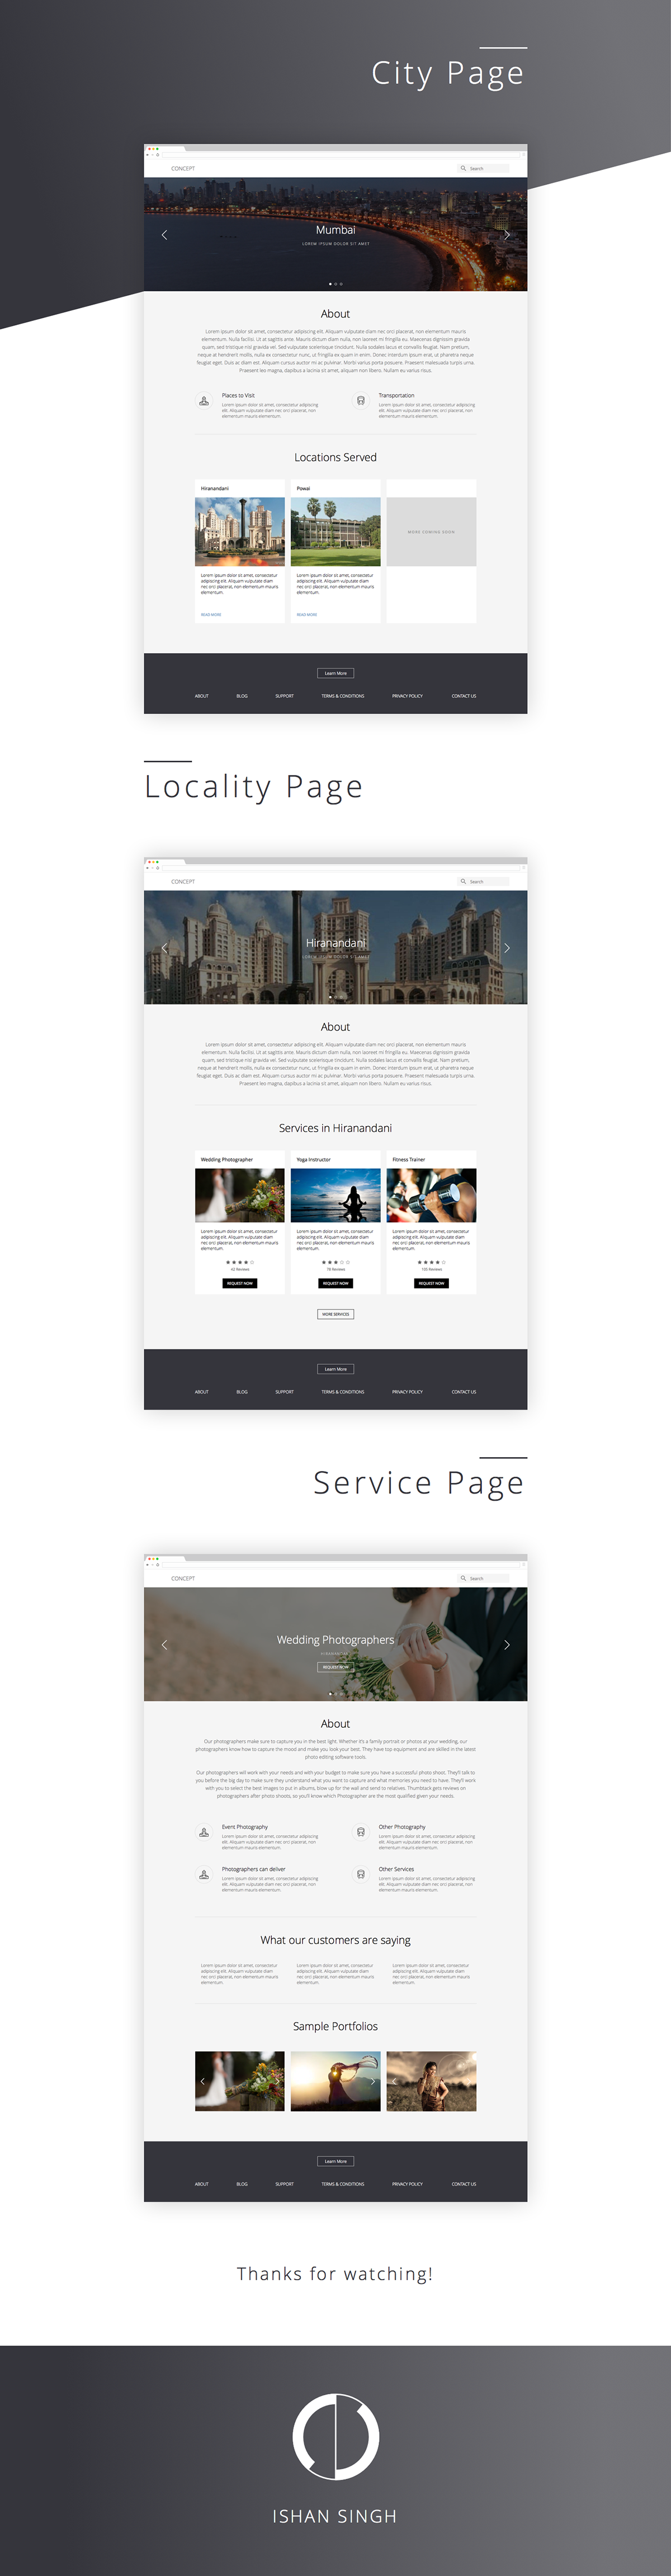 SEO Pages concept minimal web design user experience UX design webpage Website